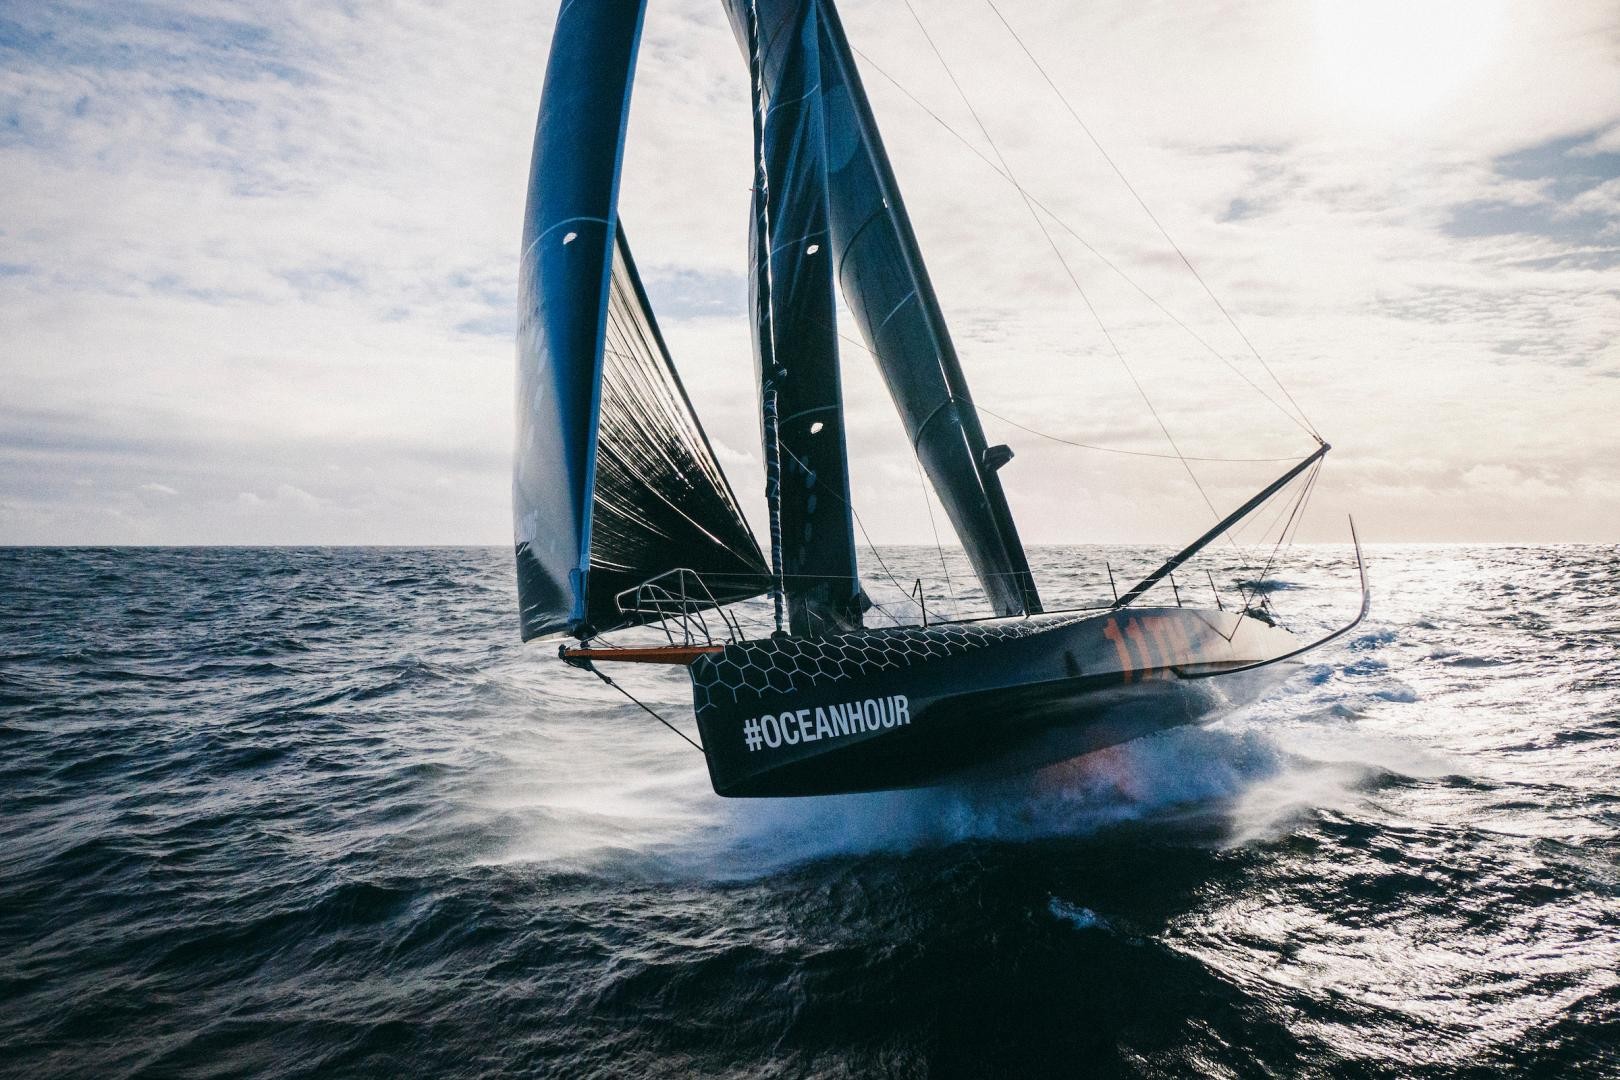 IMOCA60s will be one of two classes racing in the 2022-23 edition of The Ocean Race